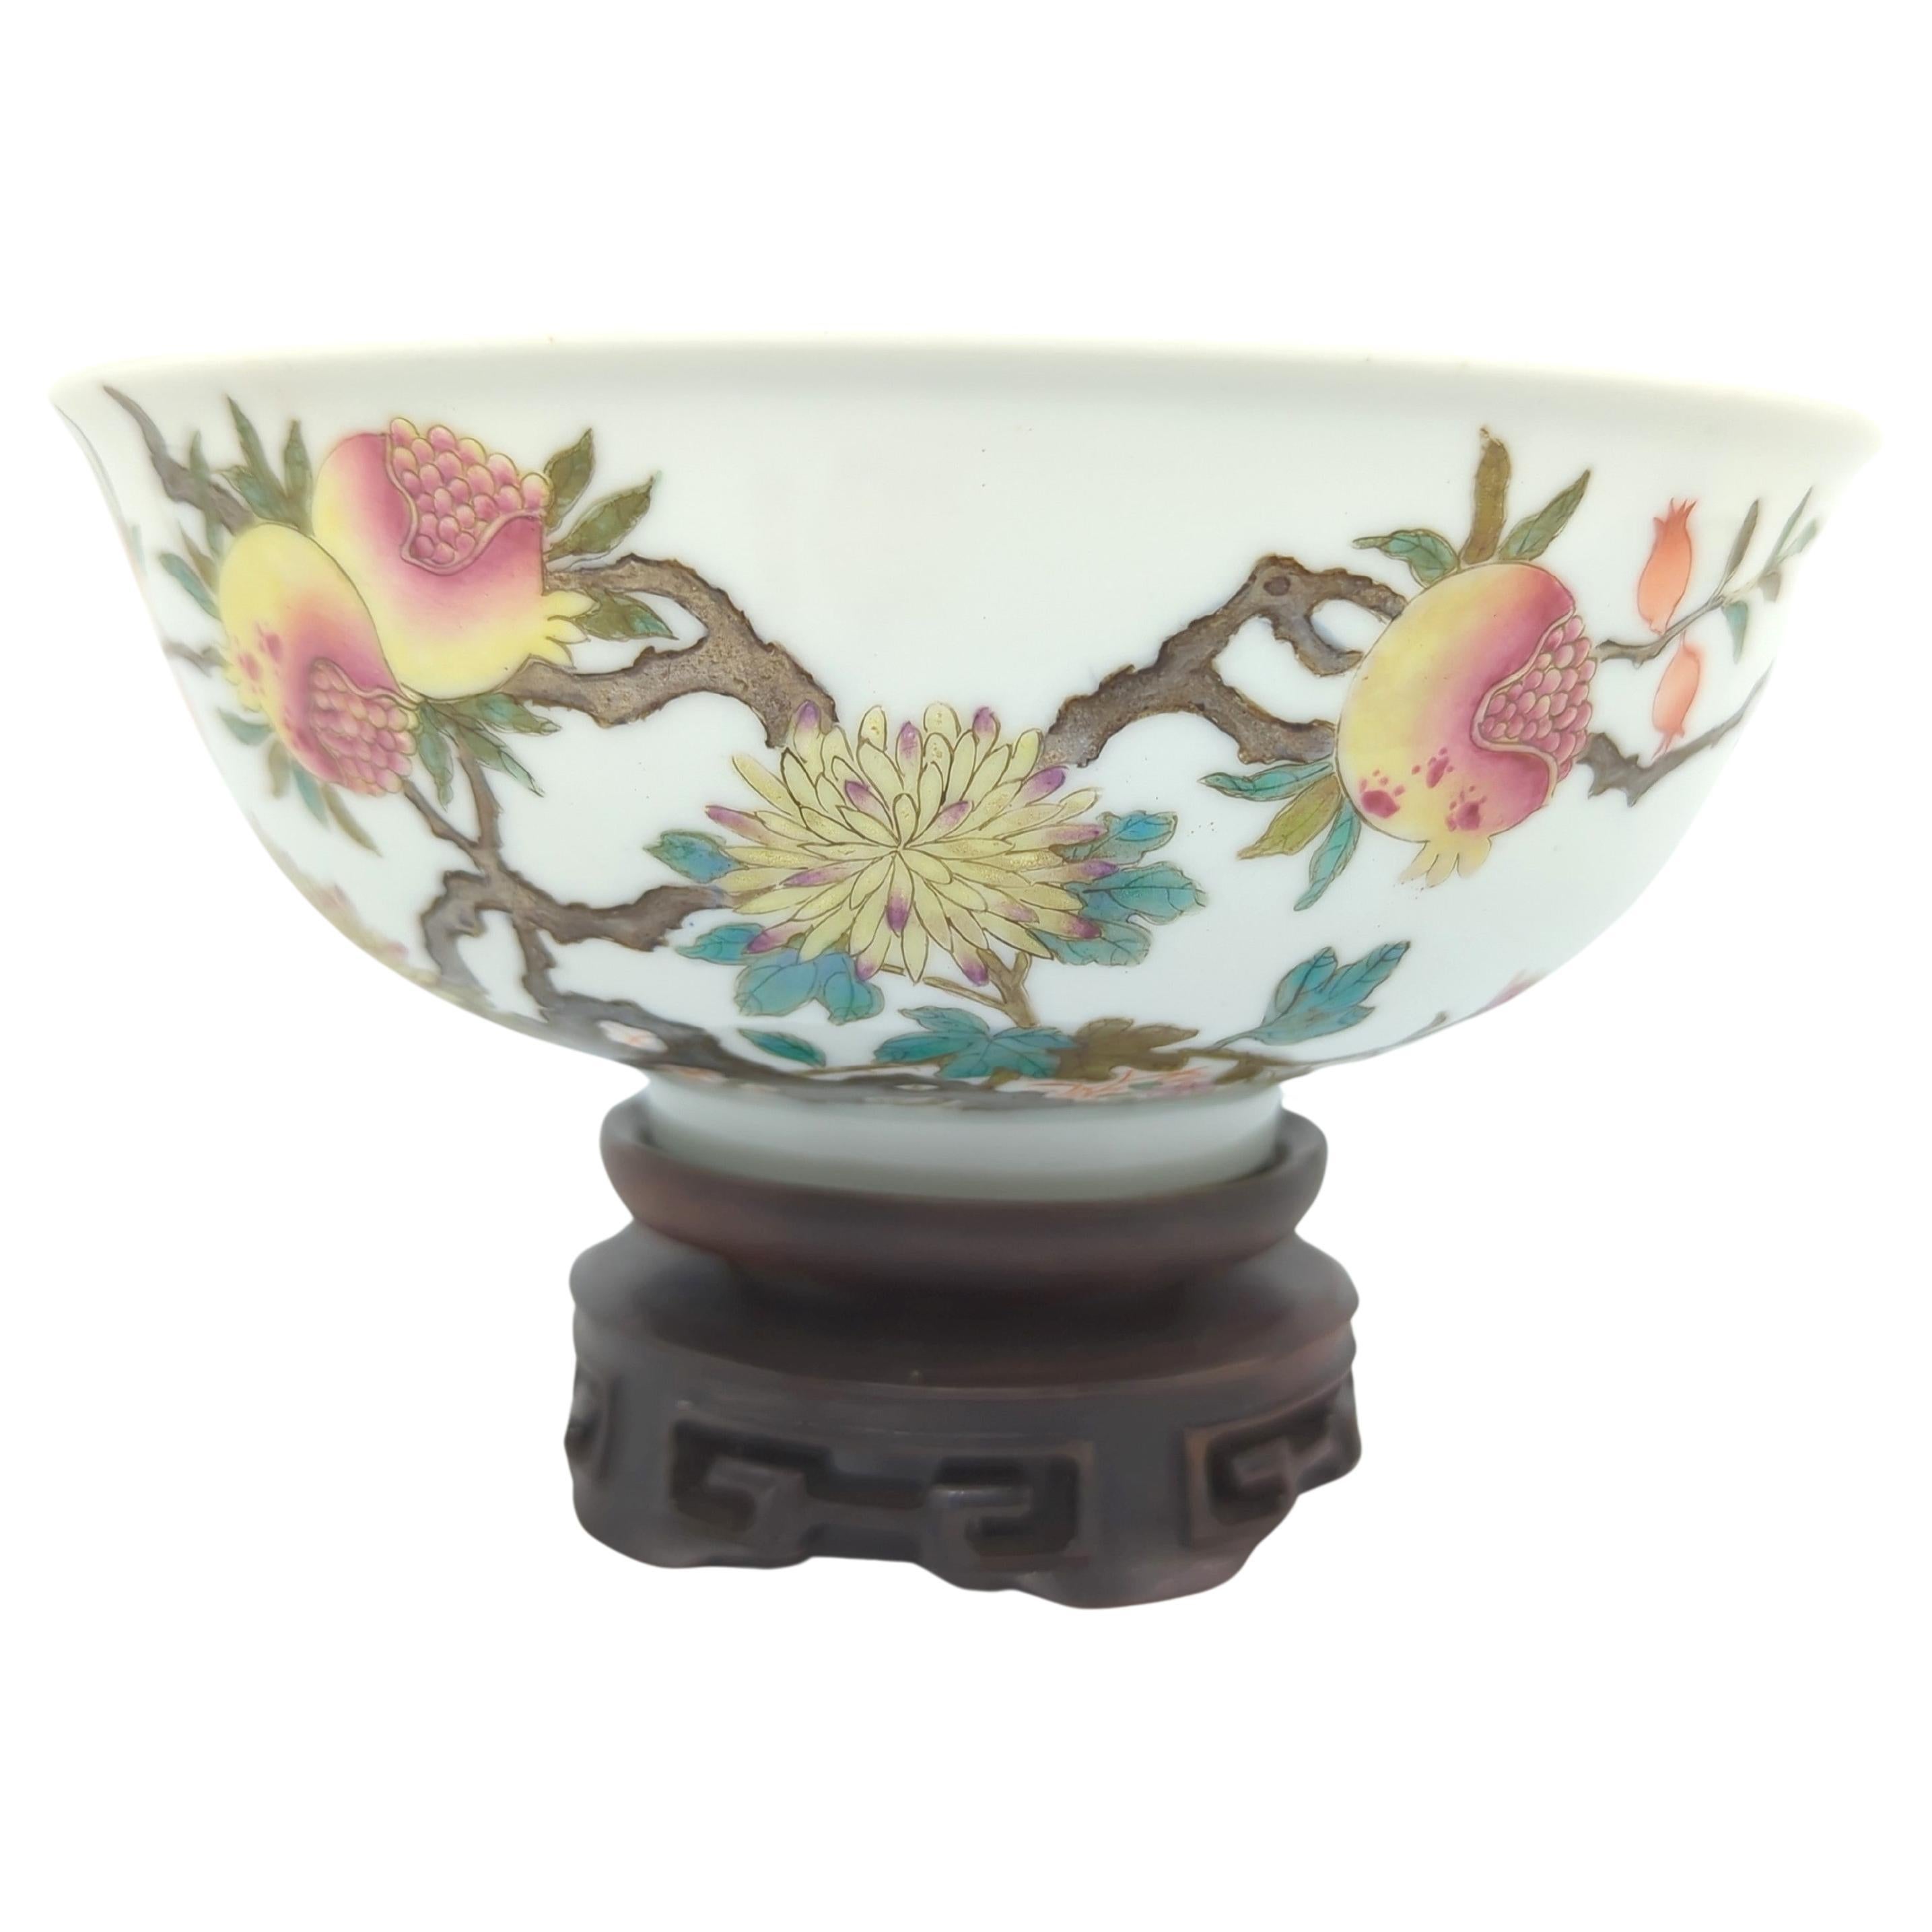 This Qing Dynasty Daoguang period famille rose porcelain bowl is a masterful example of Chinese ceramic artistry, reflecting the aesthetic sensibilities and technical prowess of its time. The exterior of the bowl is finely painted in the famille